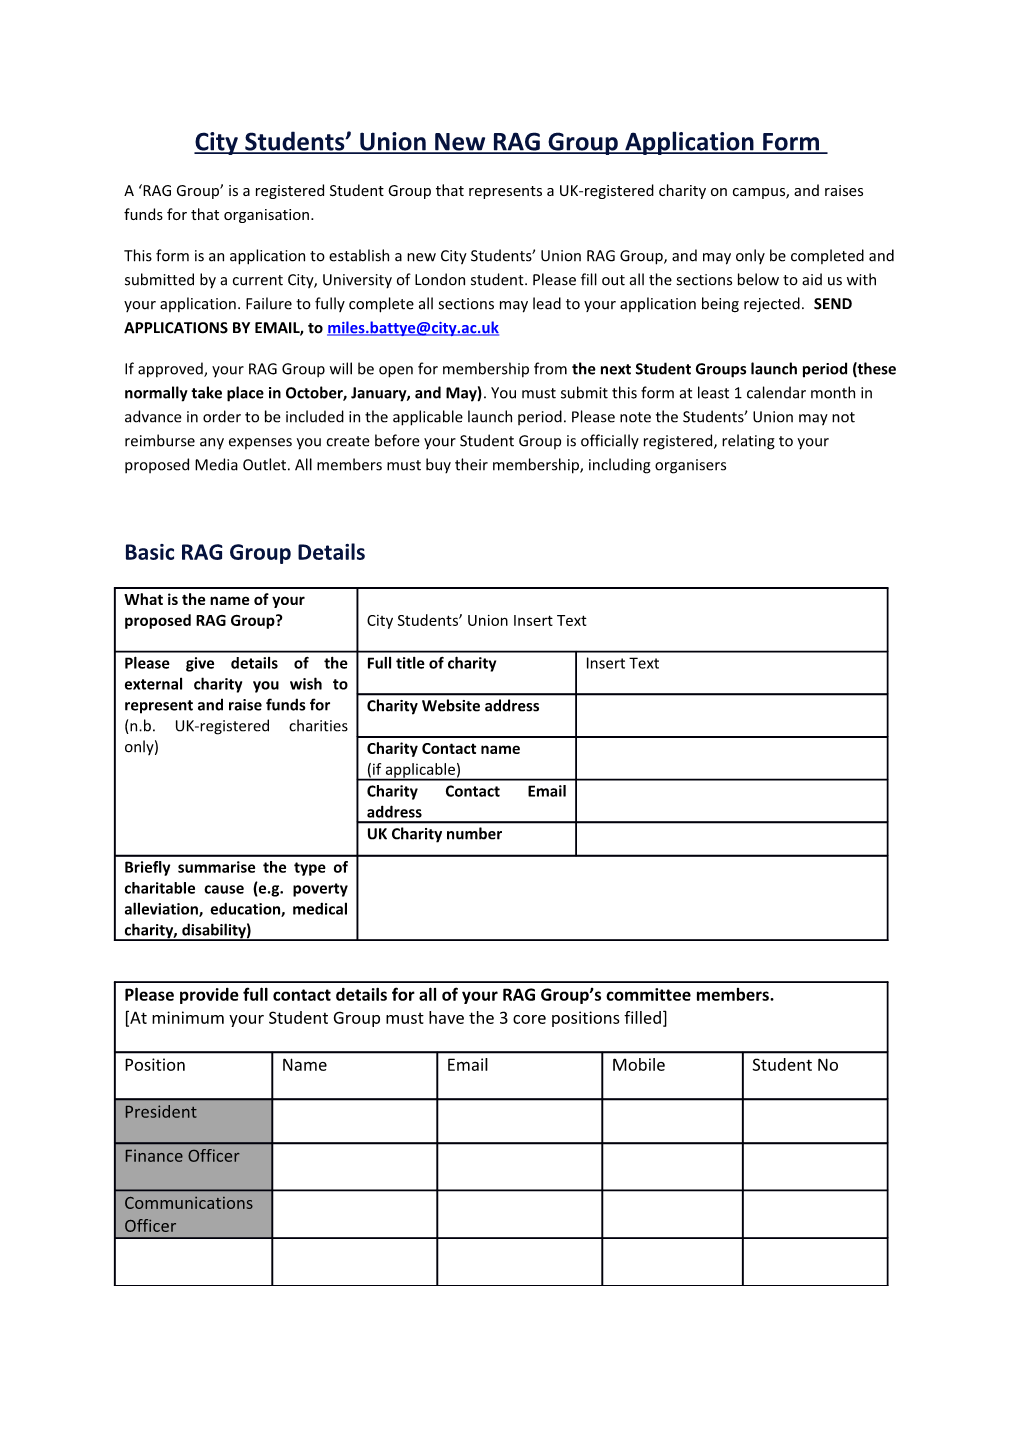 City Students Union New RAG Group Application Form